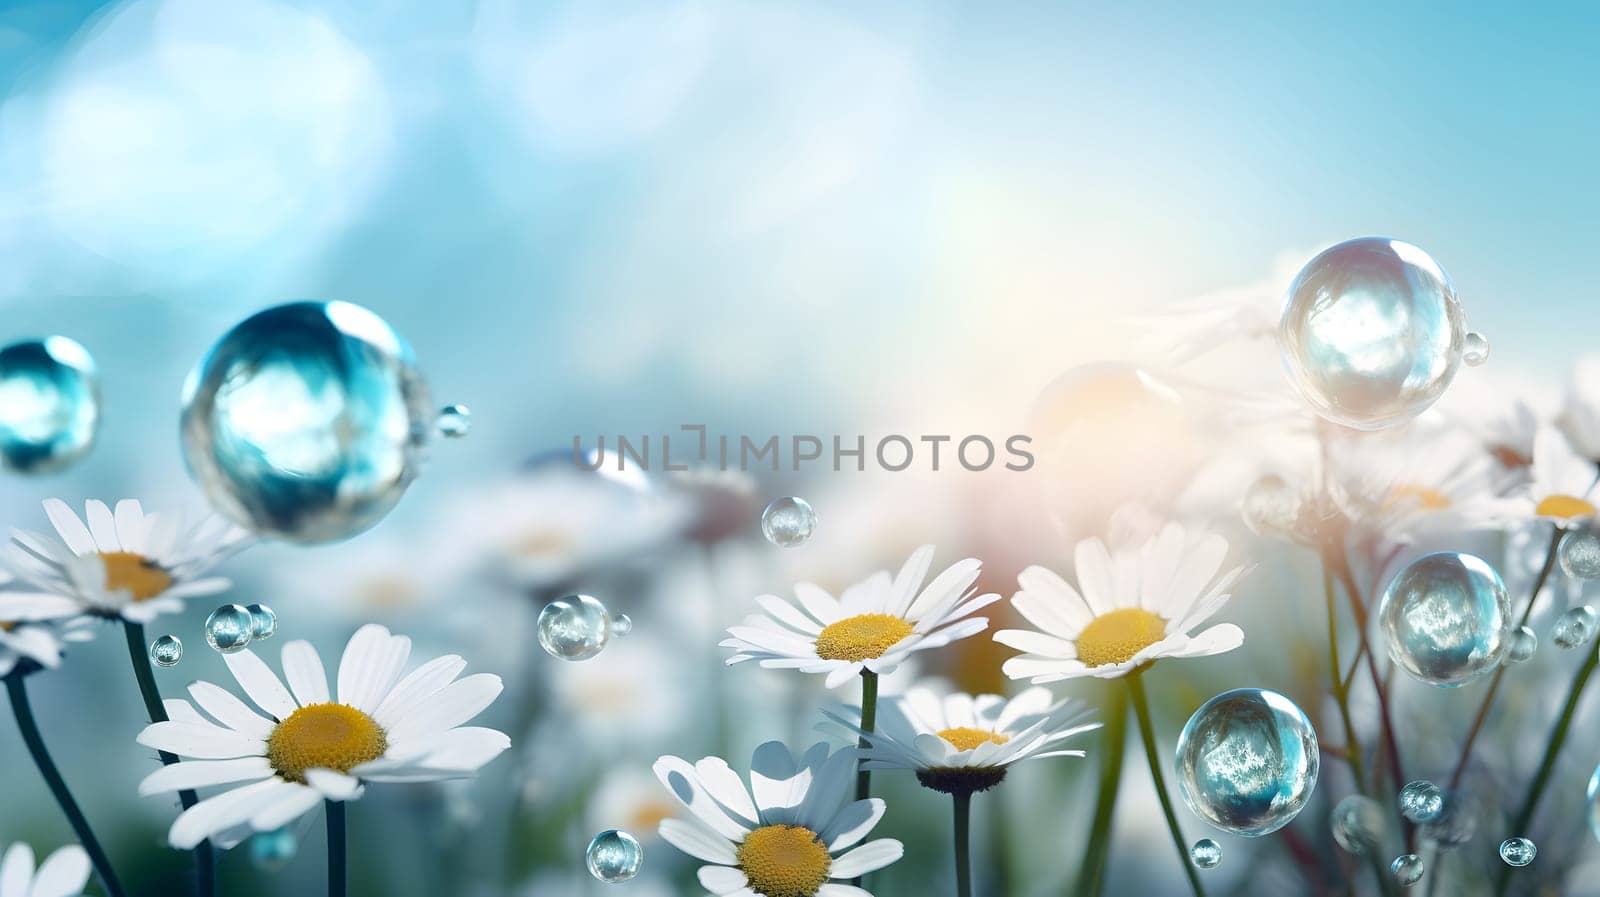 Spring motive light background and wallpaper with chamomiles, soap bubbles and bokeh, neural network generated photorealistic image by z1b